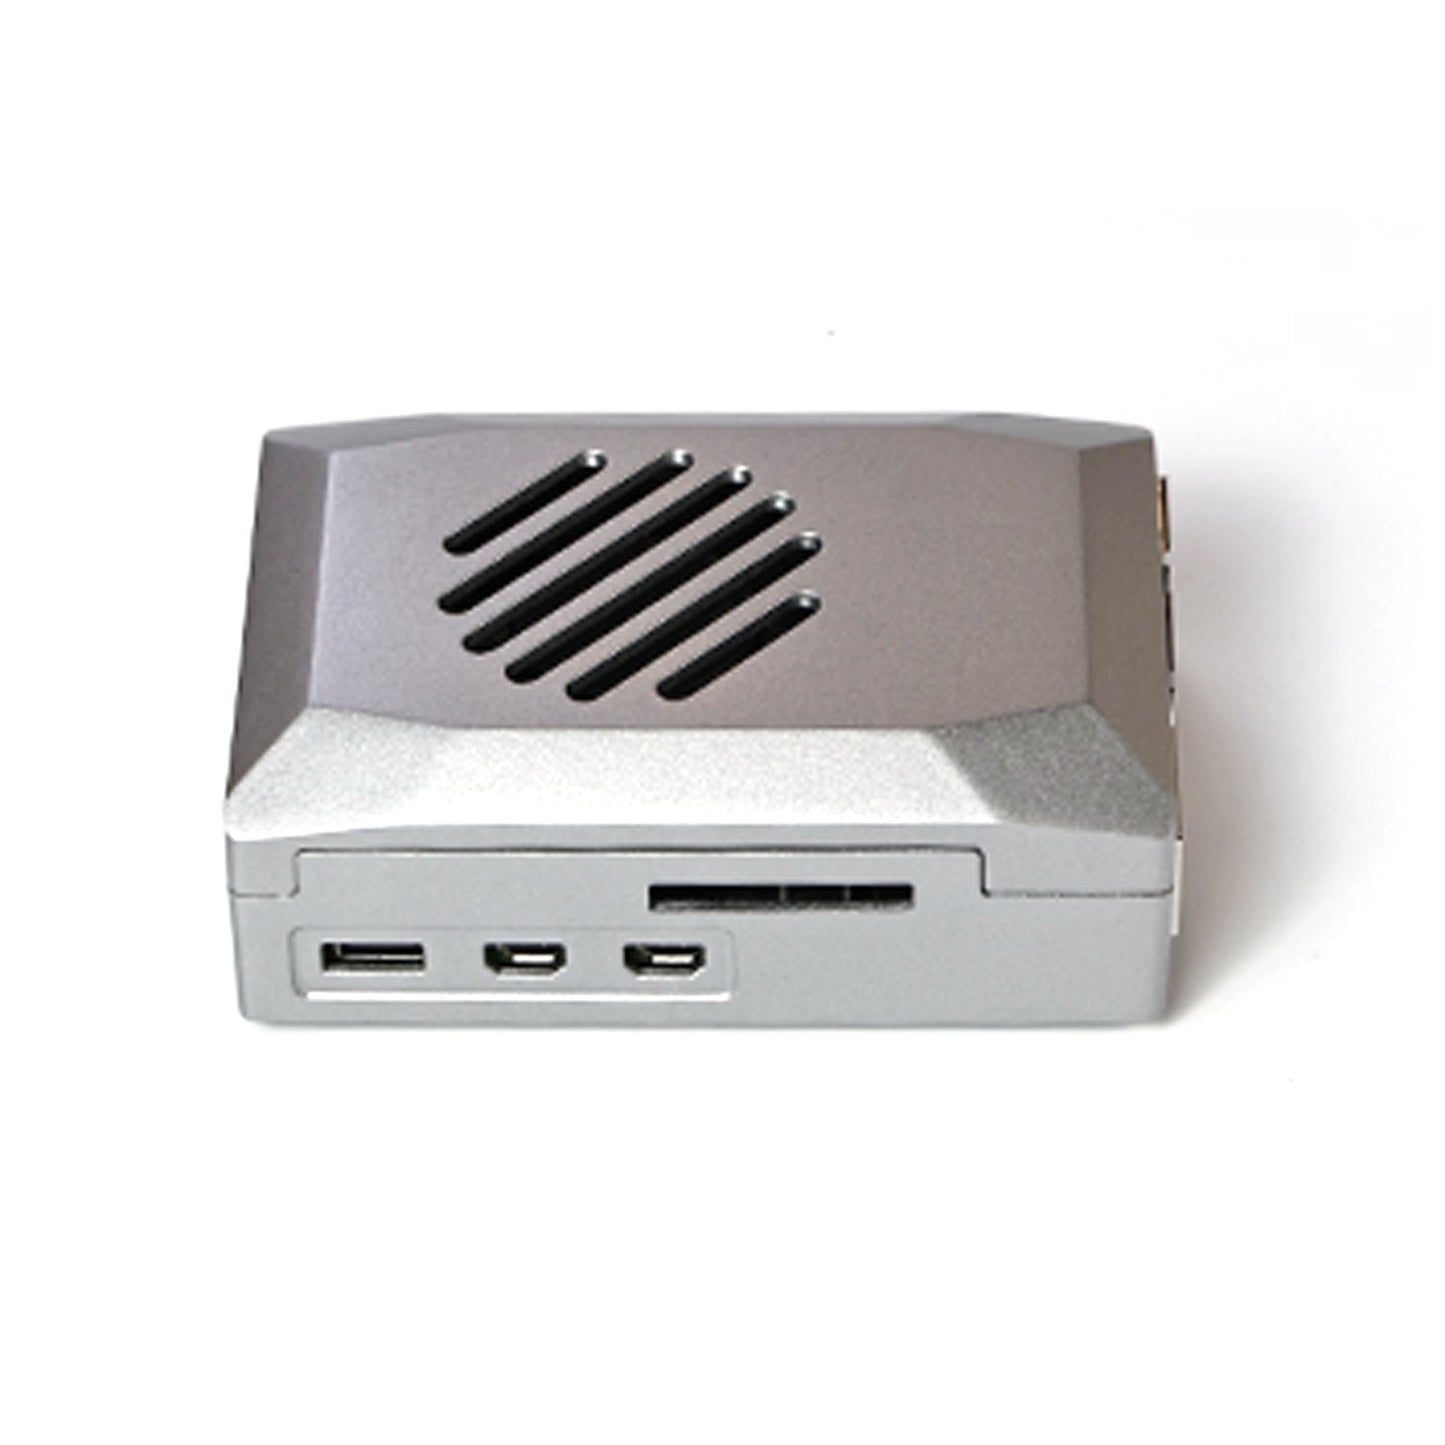 Silver Shadow Shell Raspberry pi5 Protective Box ABS Material Speed Control Fan